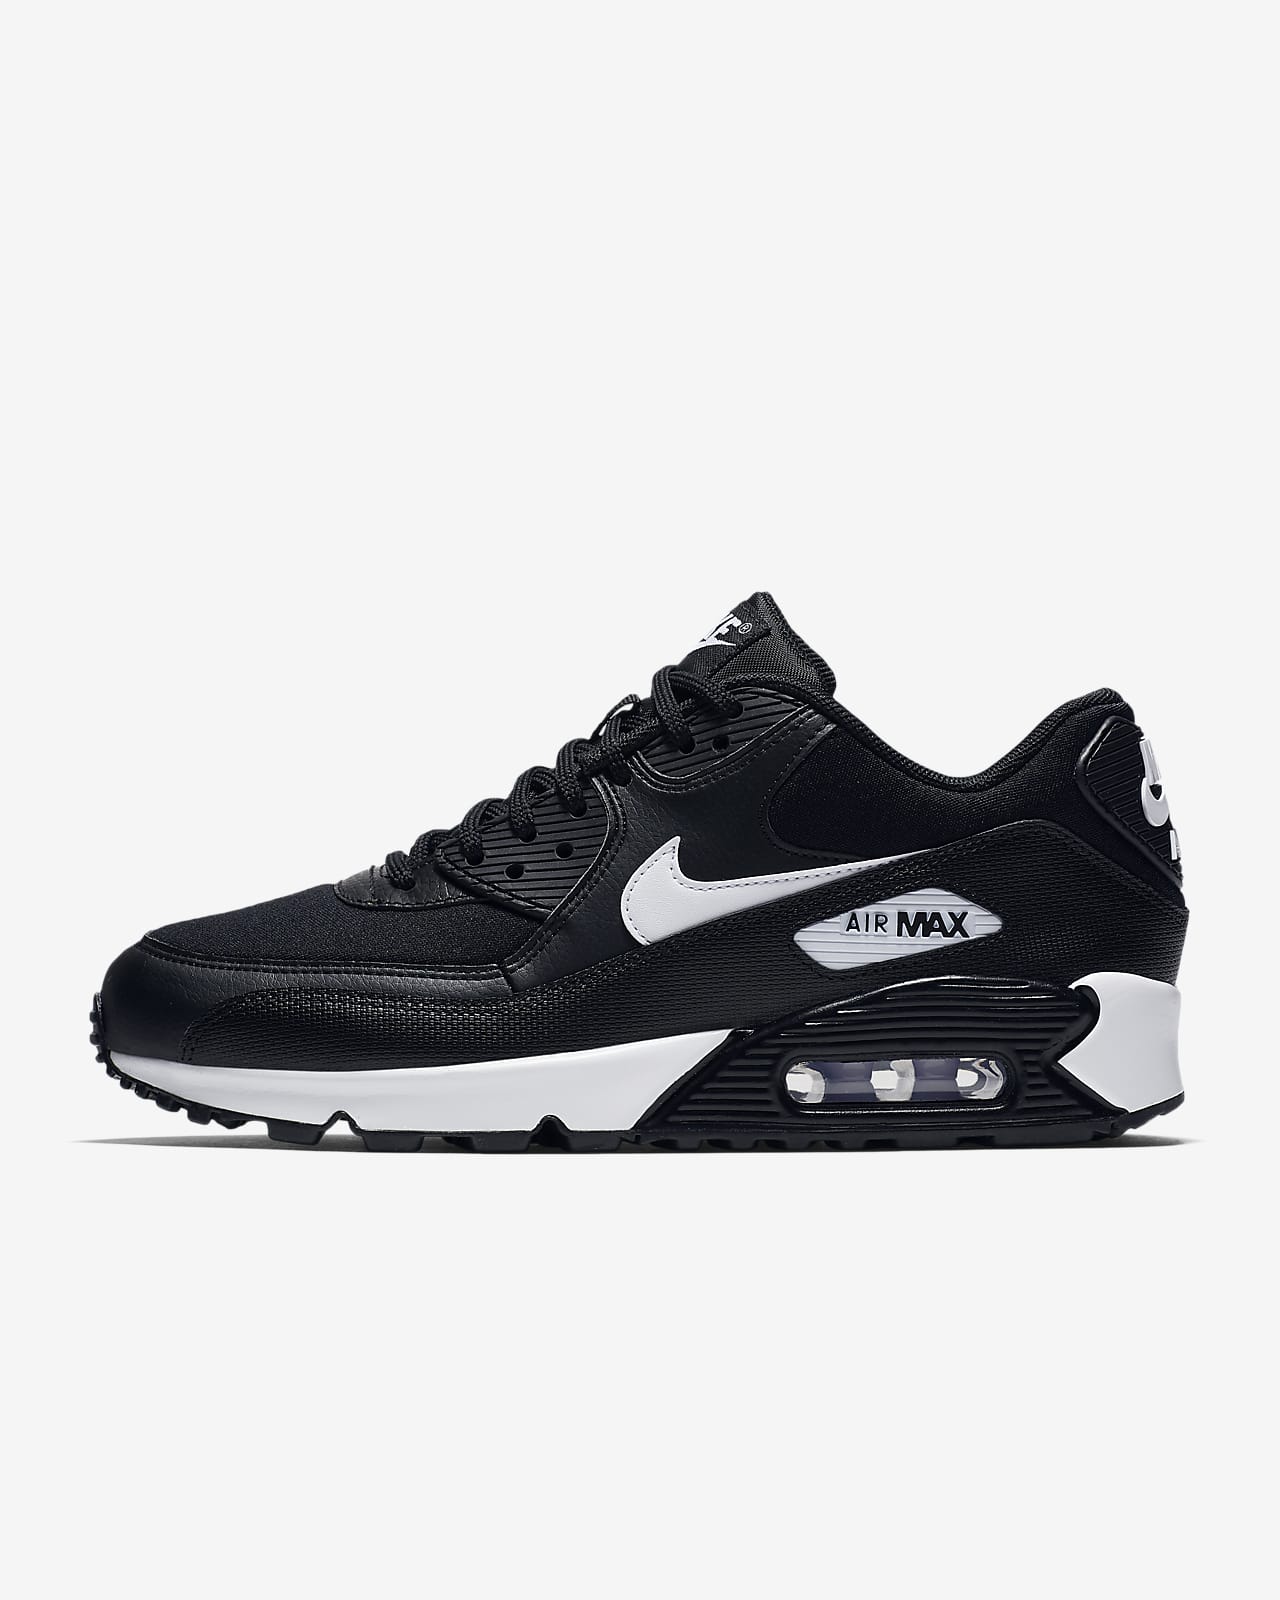 nike womens air max 90 in black pink and white